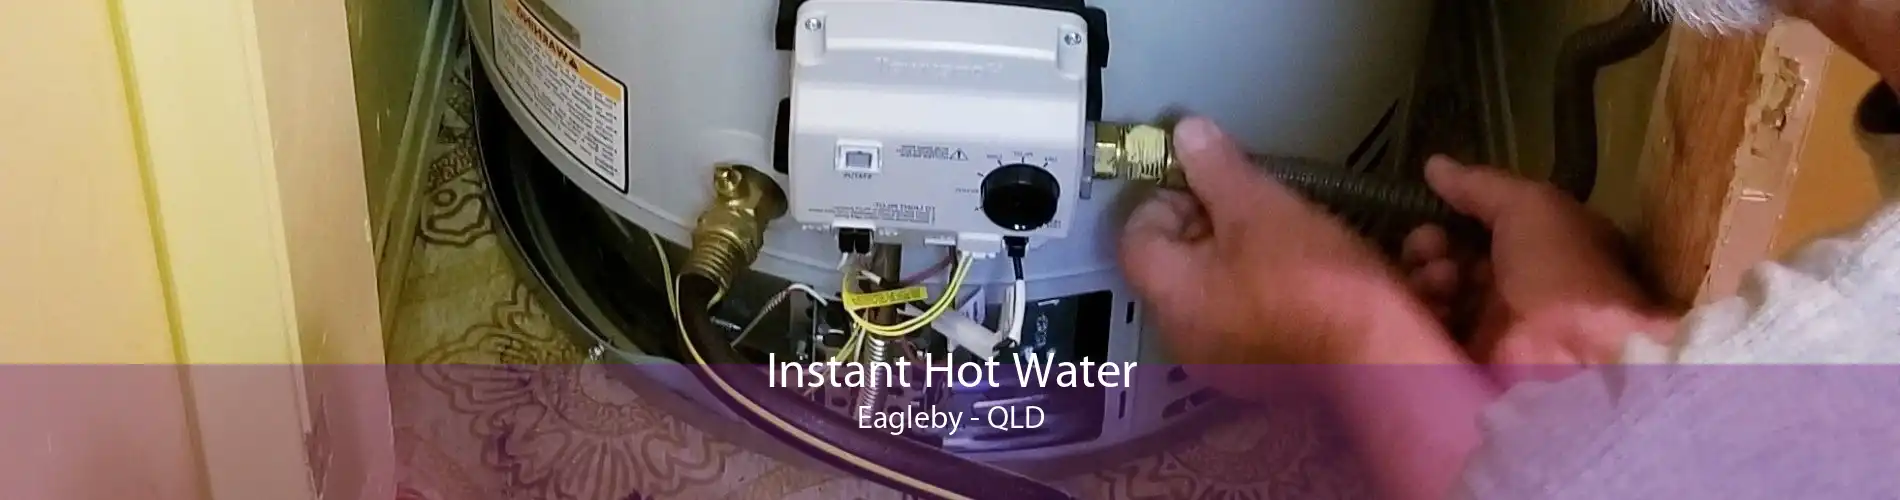 Instant Hot Water Eagleby - QLD